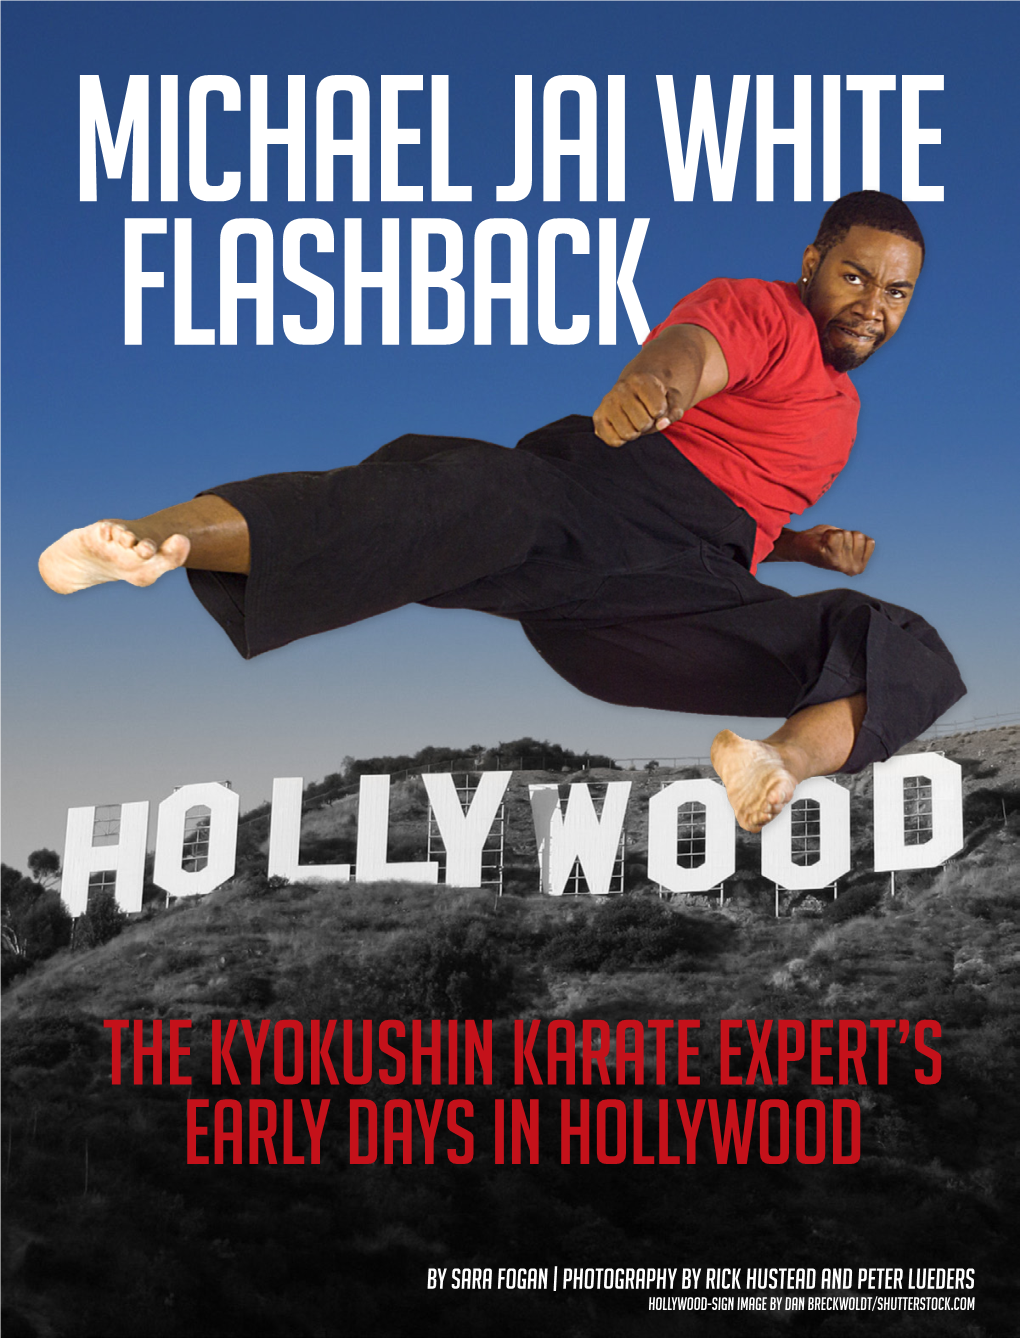 The Kyokushin Karate Expert's Early Days in Hollywood